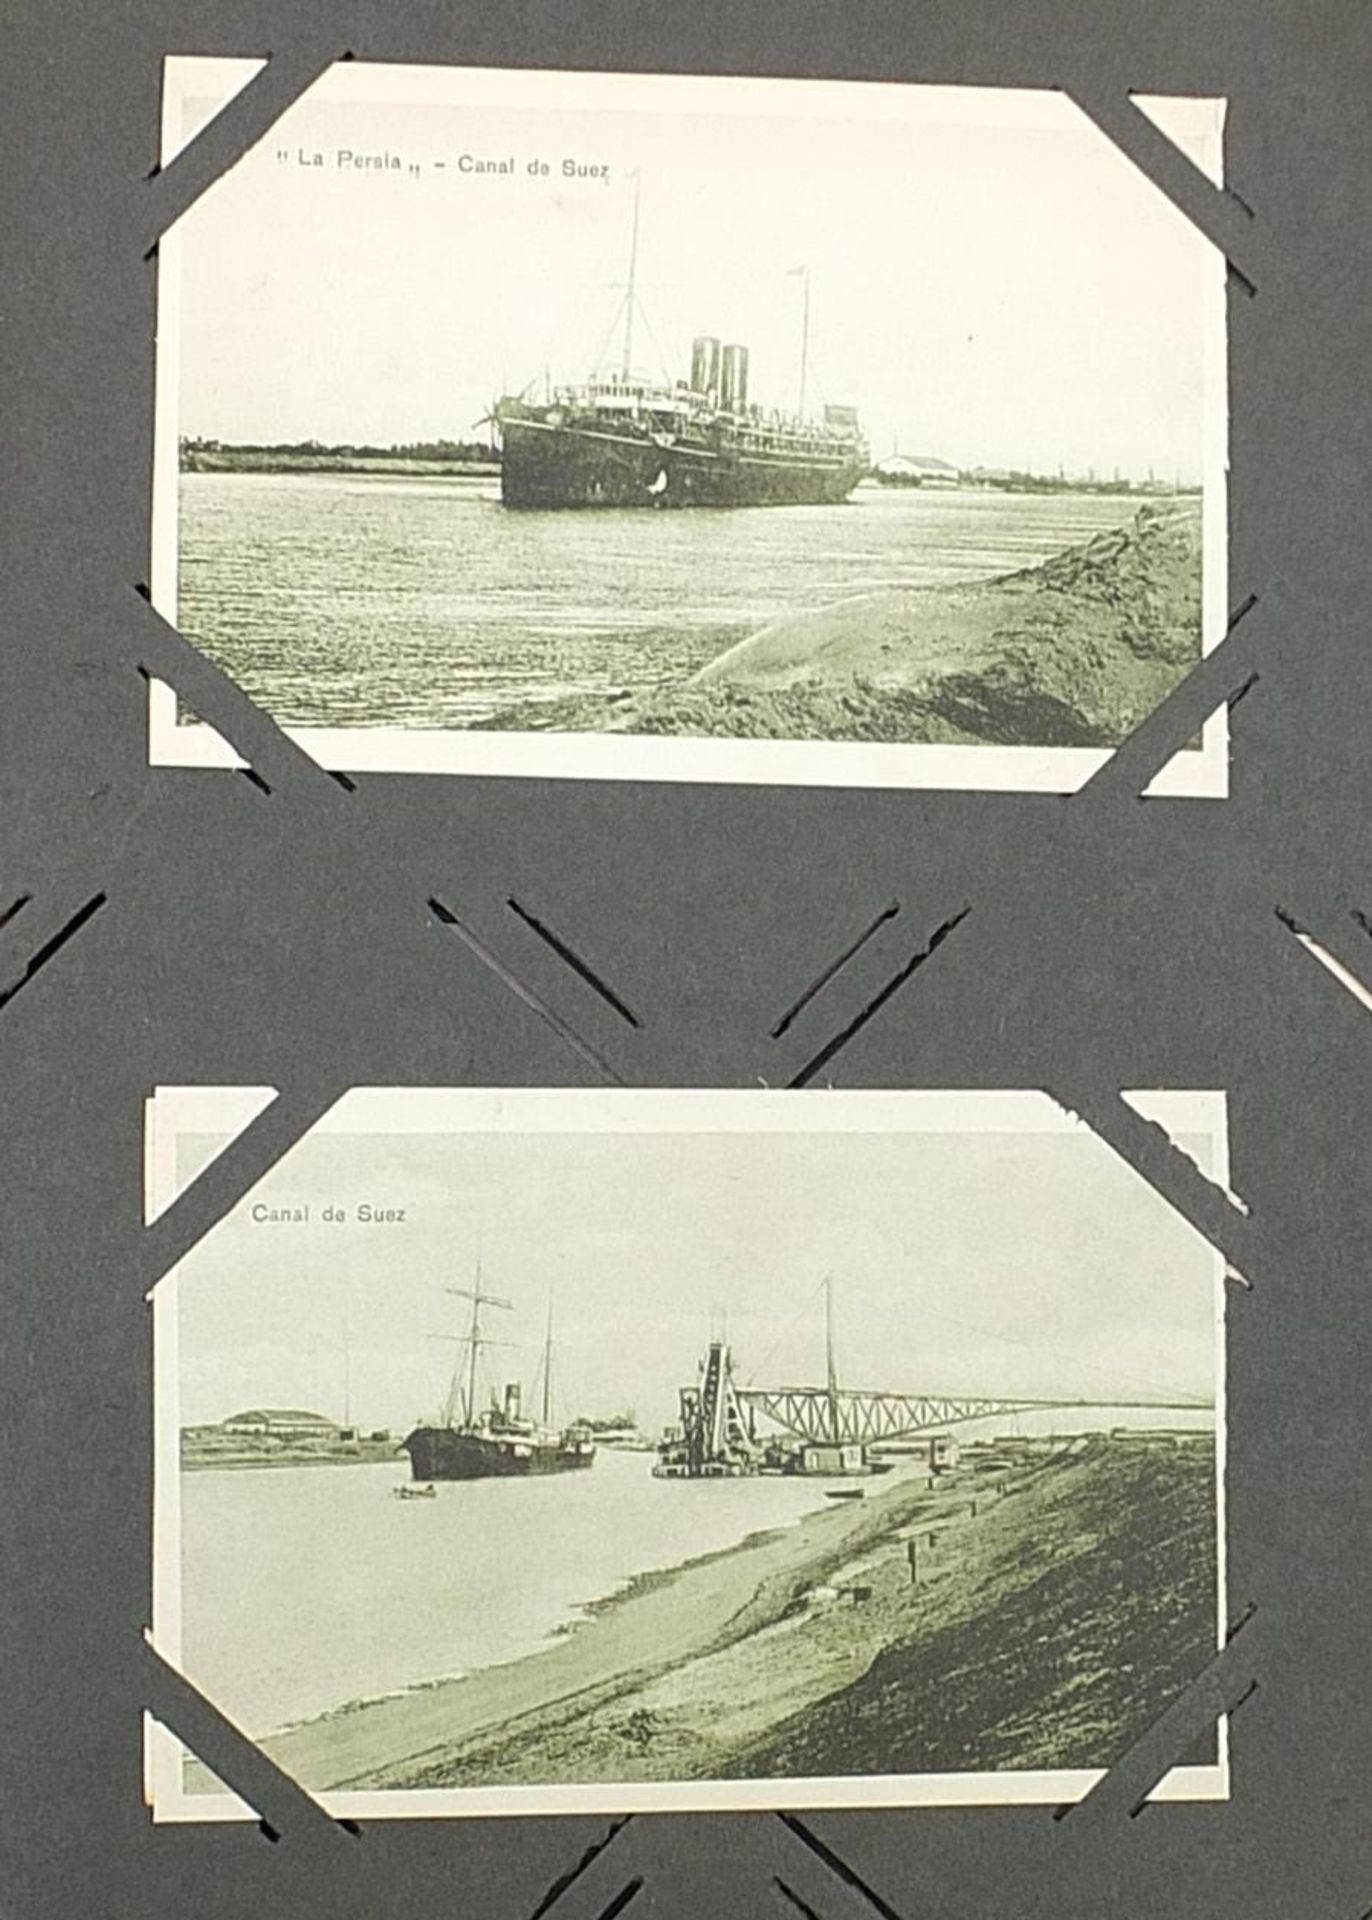 Topographical and Naval interest postcards arranged in an album, some photographic including ships - Image 9 of 15